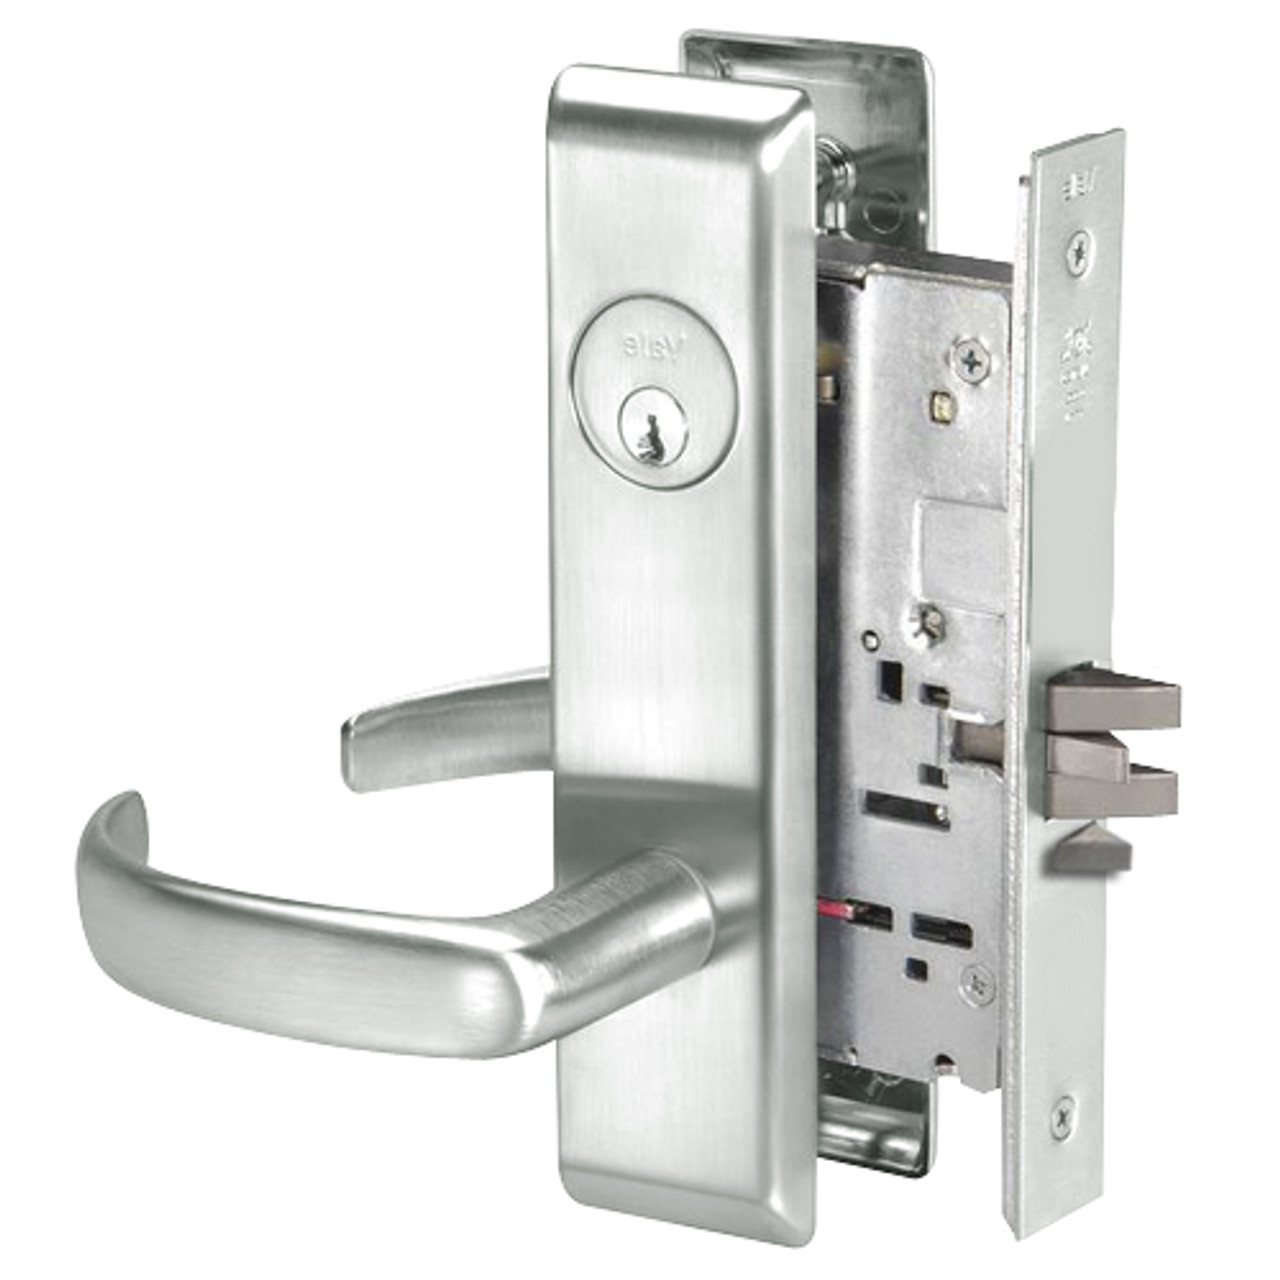 PBCN8864FL-618 Yale 8800FL Series Single Cylinder Mortise Bathroom Lock with Indicator with Pacific Beach Lever in Bright Nickel